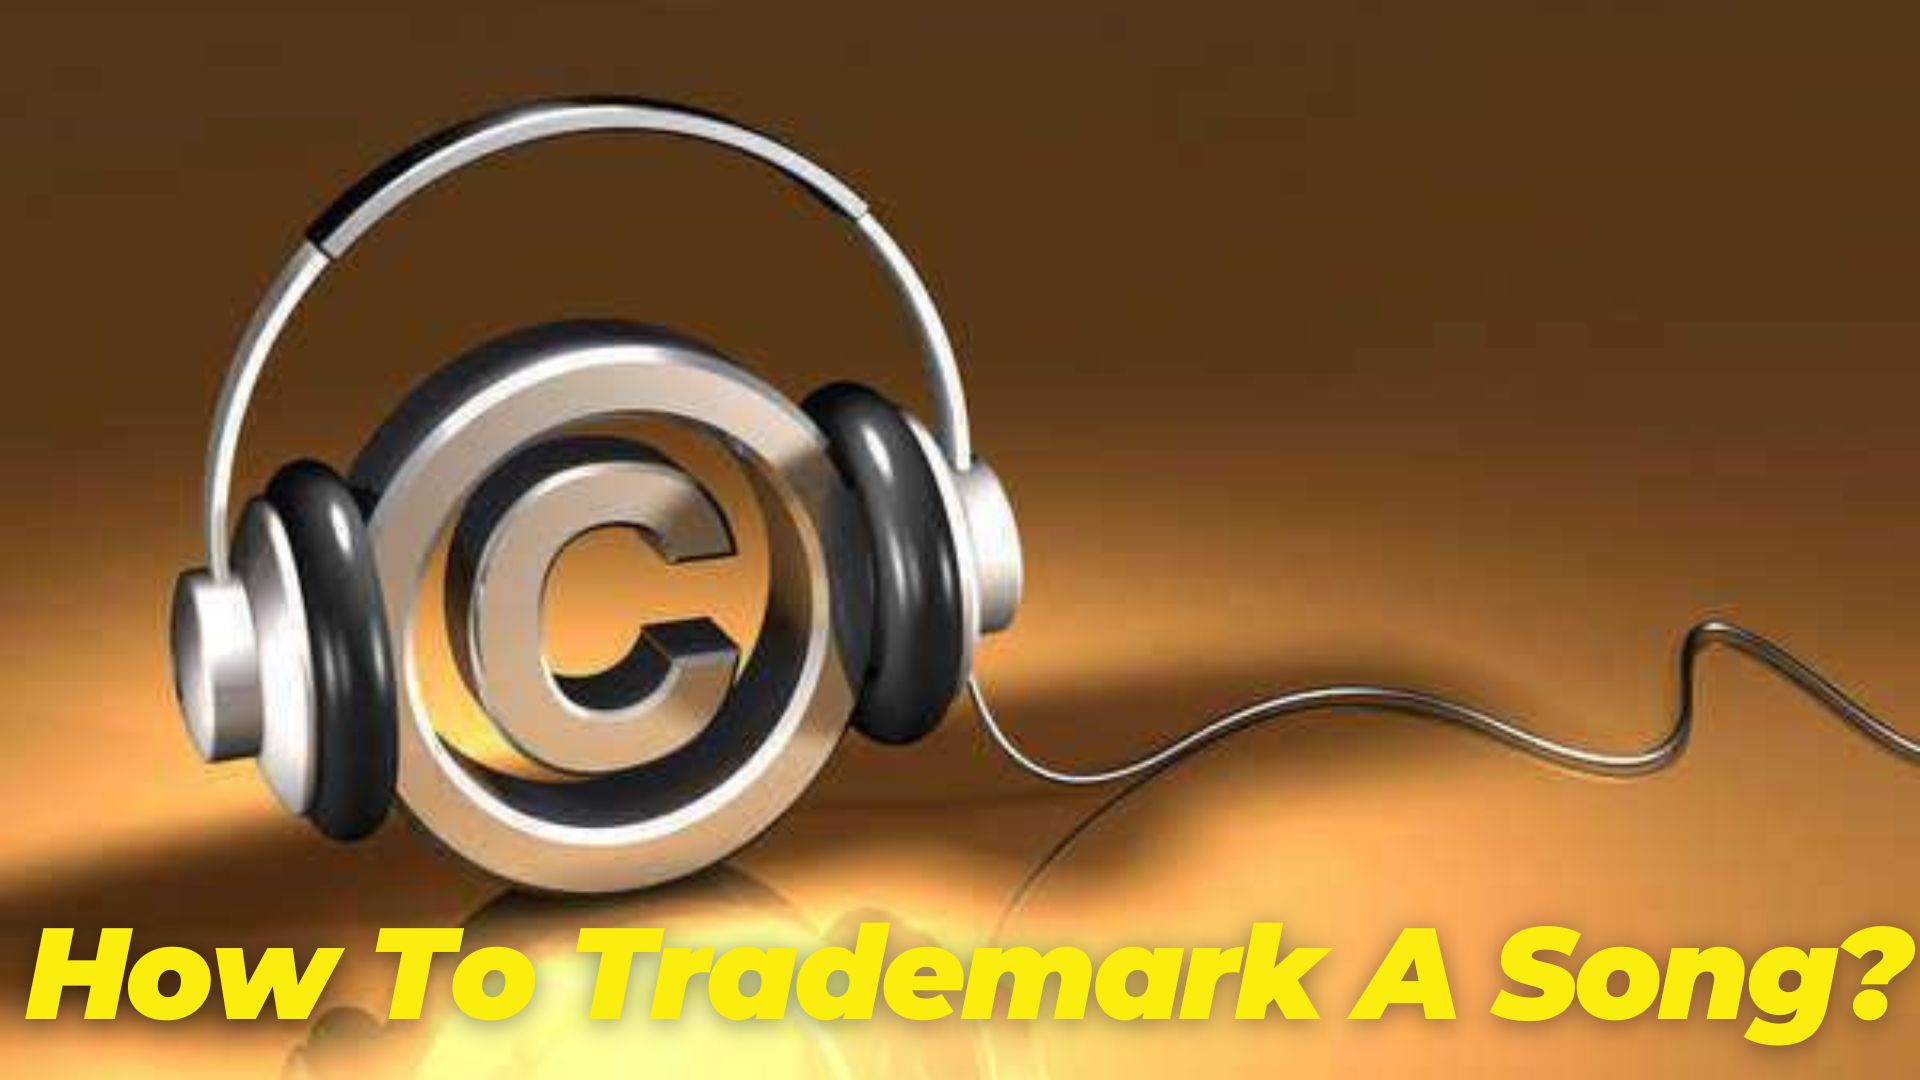 How To Trademark A Song